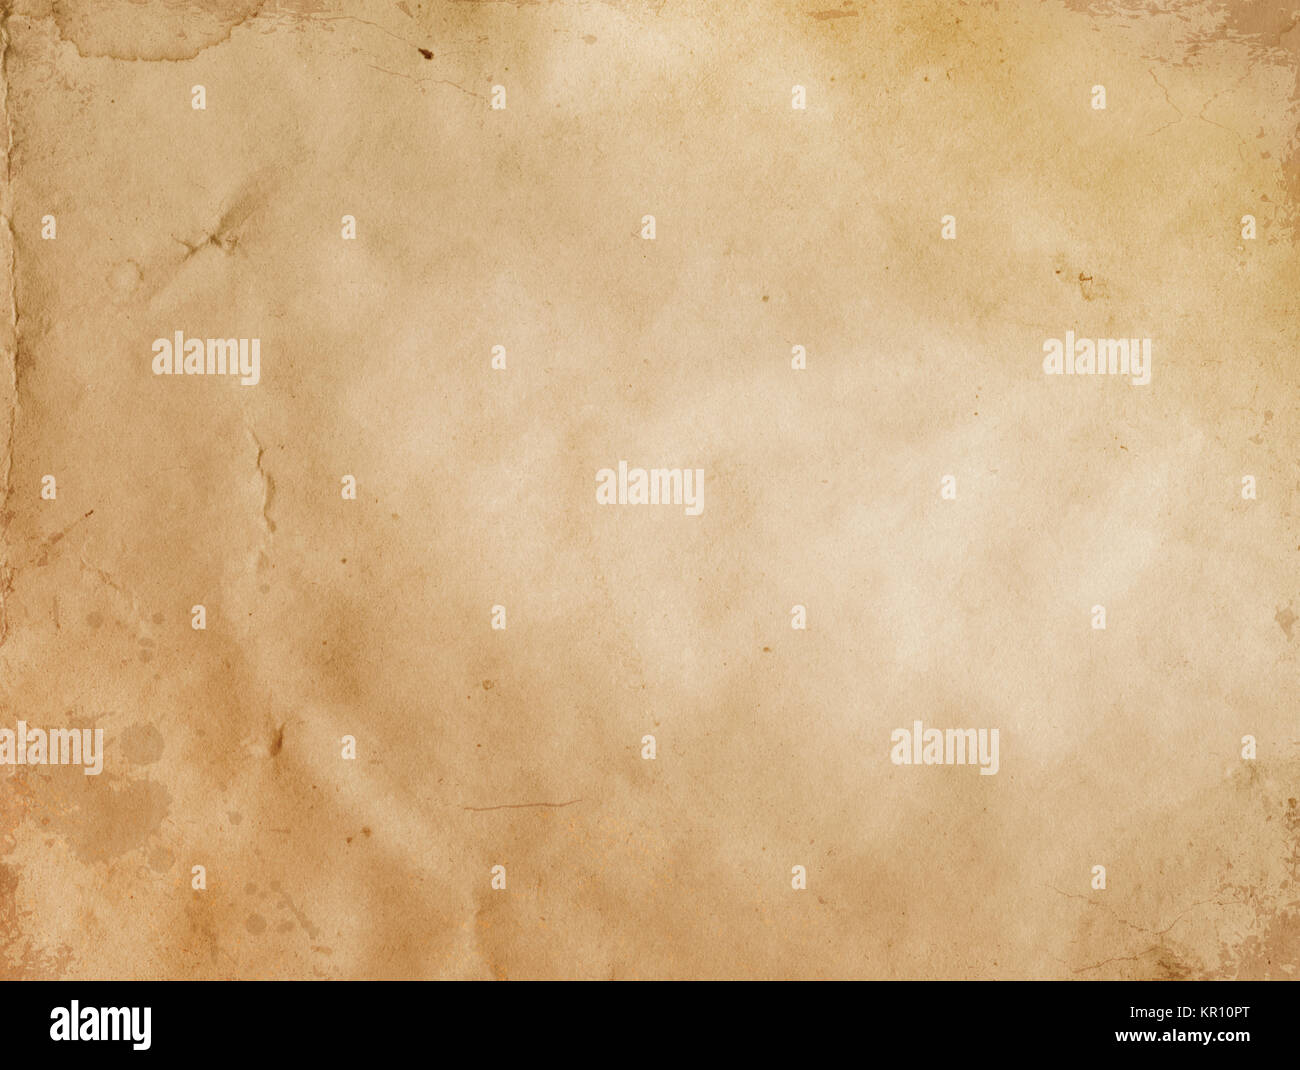 Dirty paper background.Natural old paper texture for the design. Stock Photo